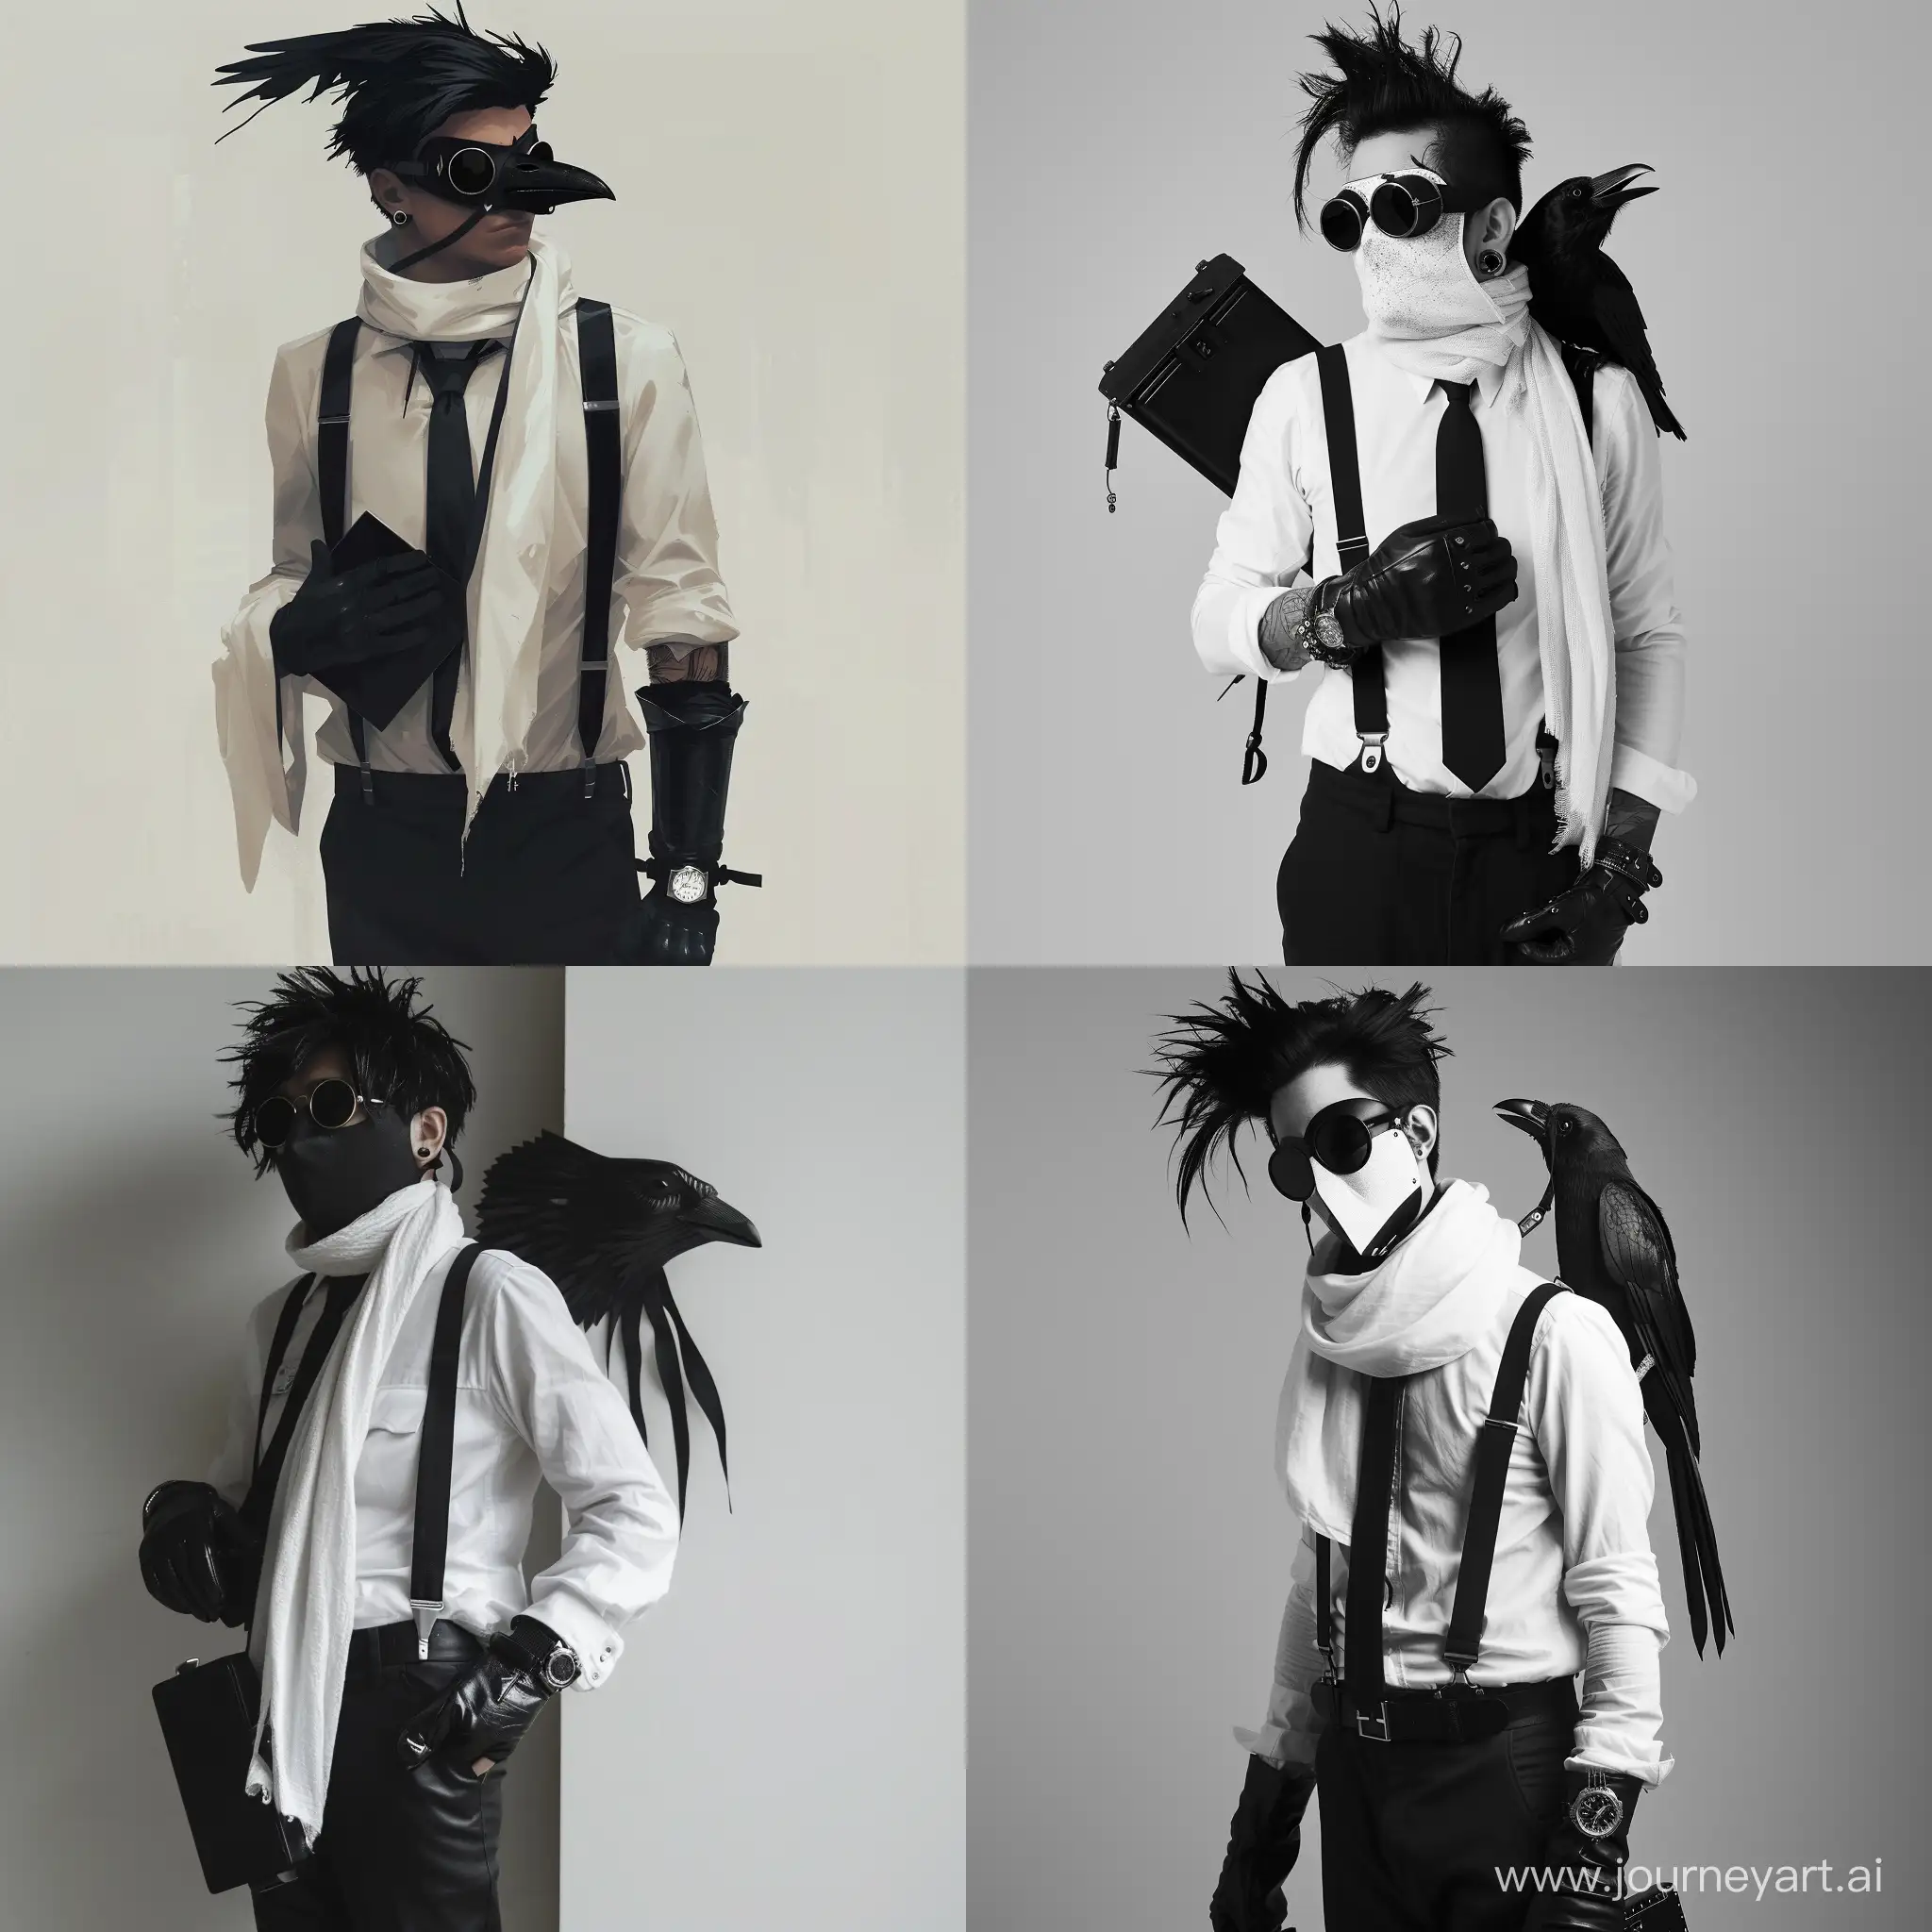 Stylish-Buff-Man-in-Black-and-White-Attire-Holding-a-Mysterious-Case-with-Crow-Mask